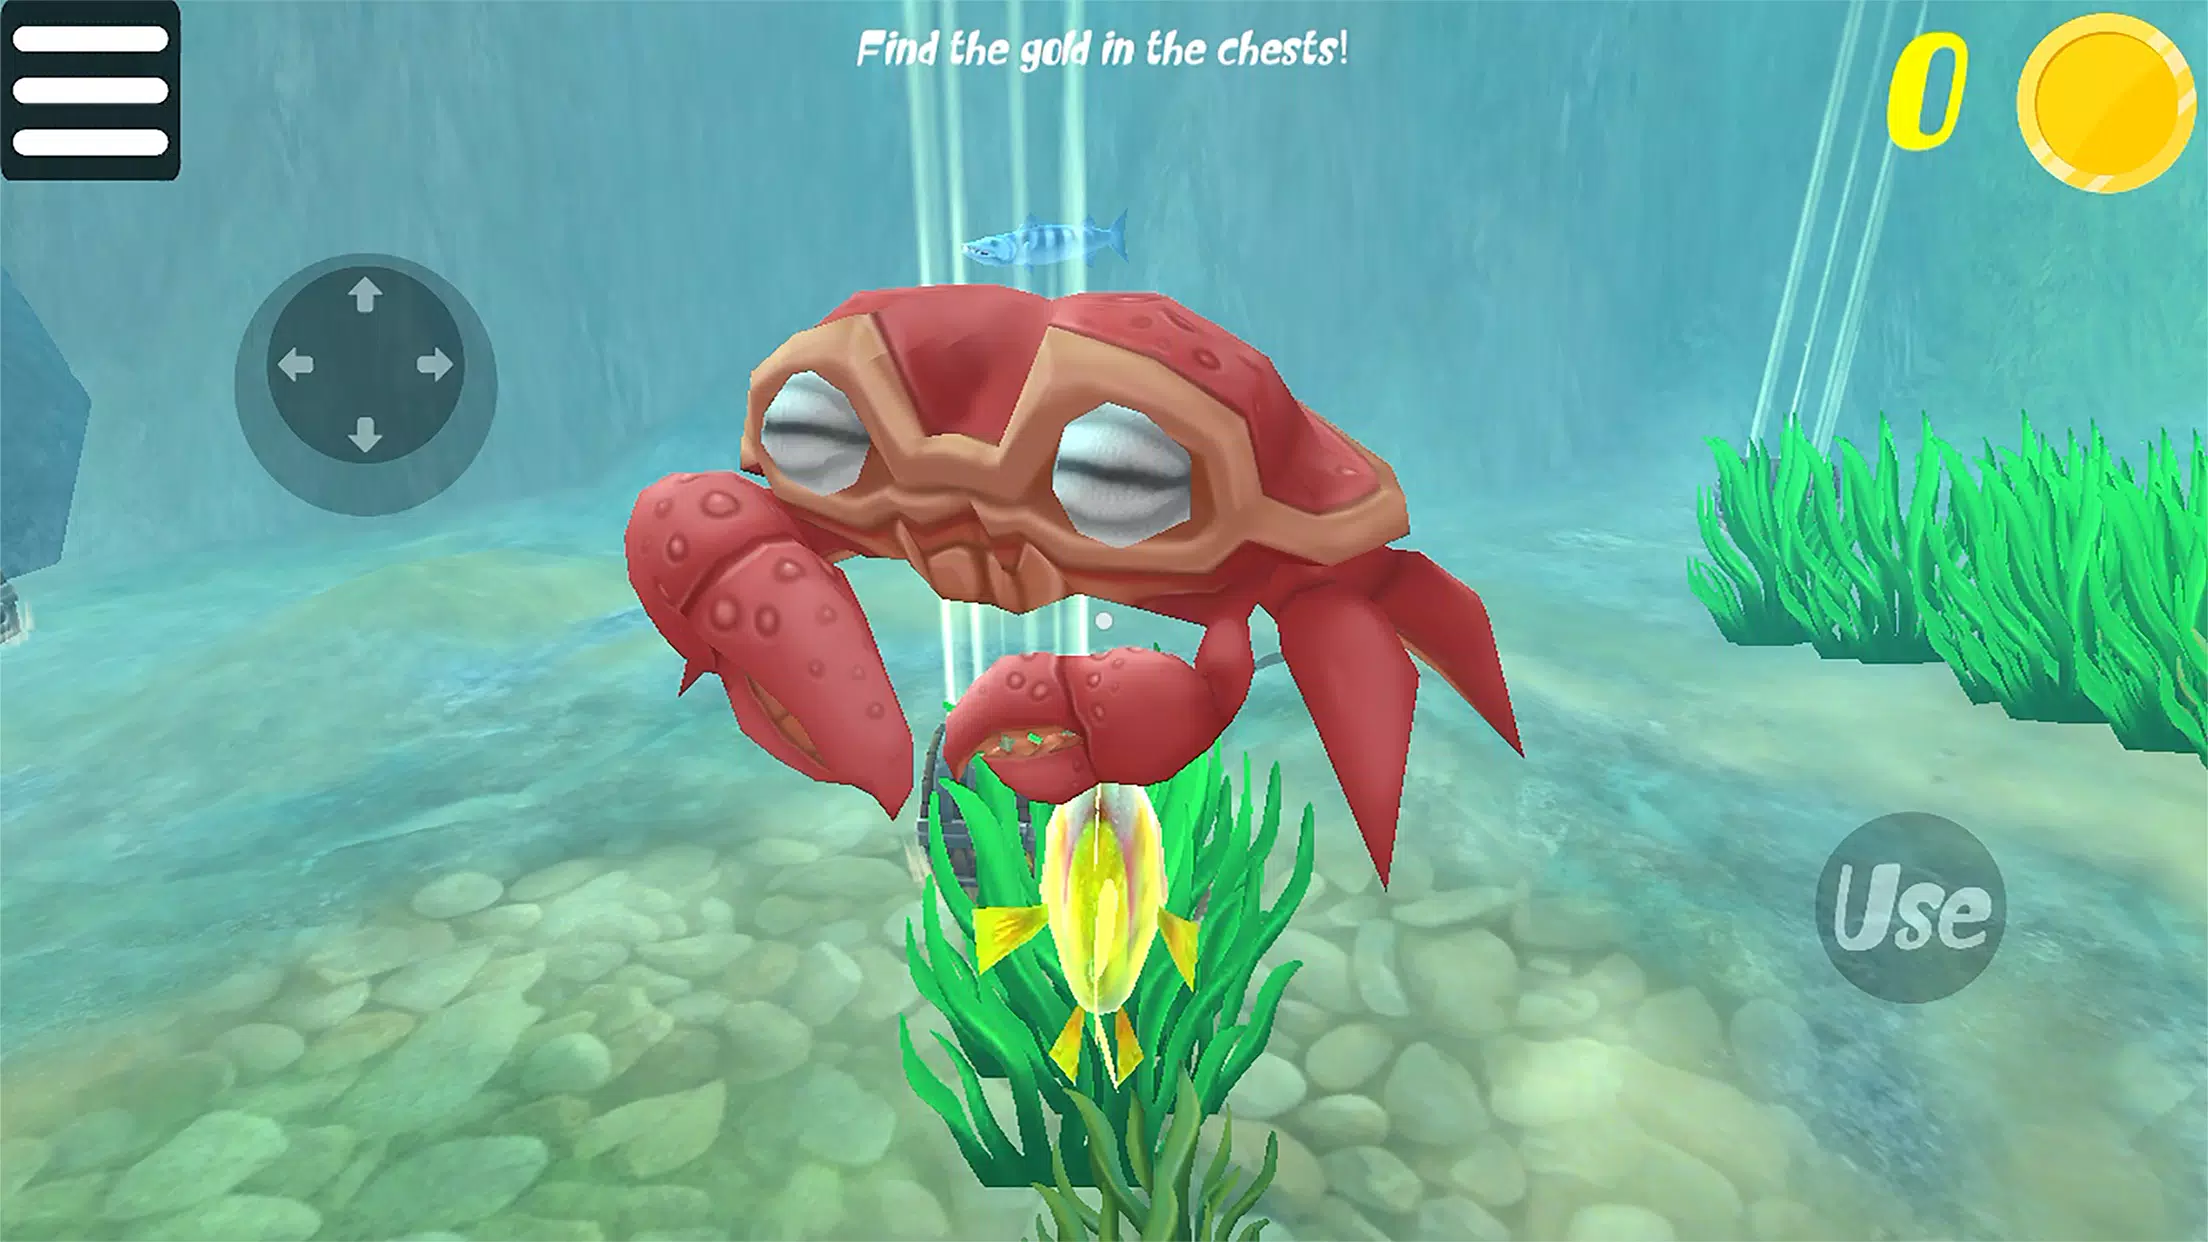 3D Fish Feeding and Grow on the App Store